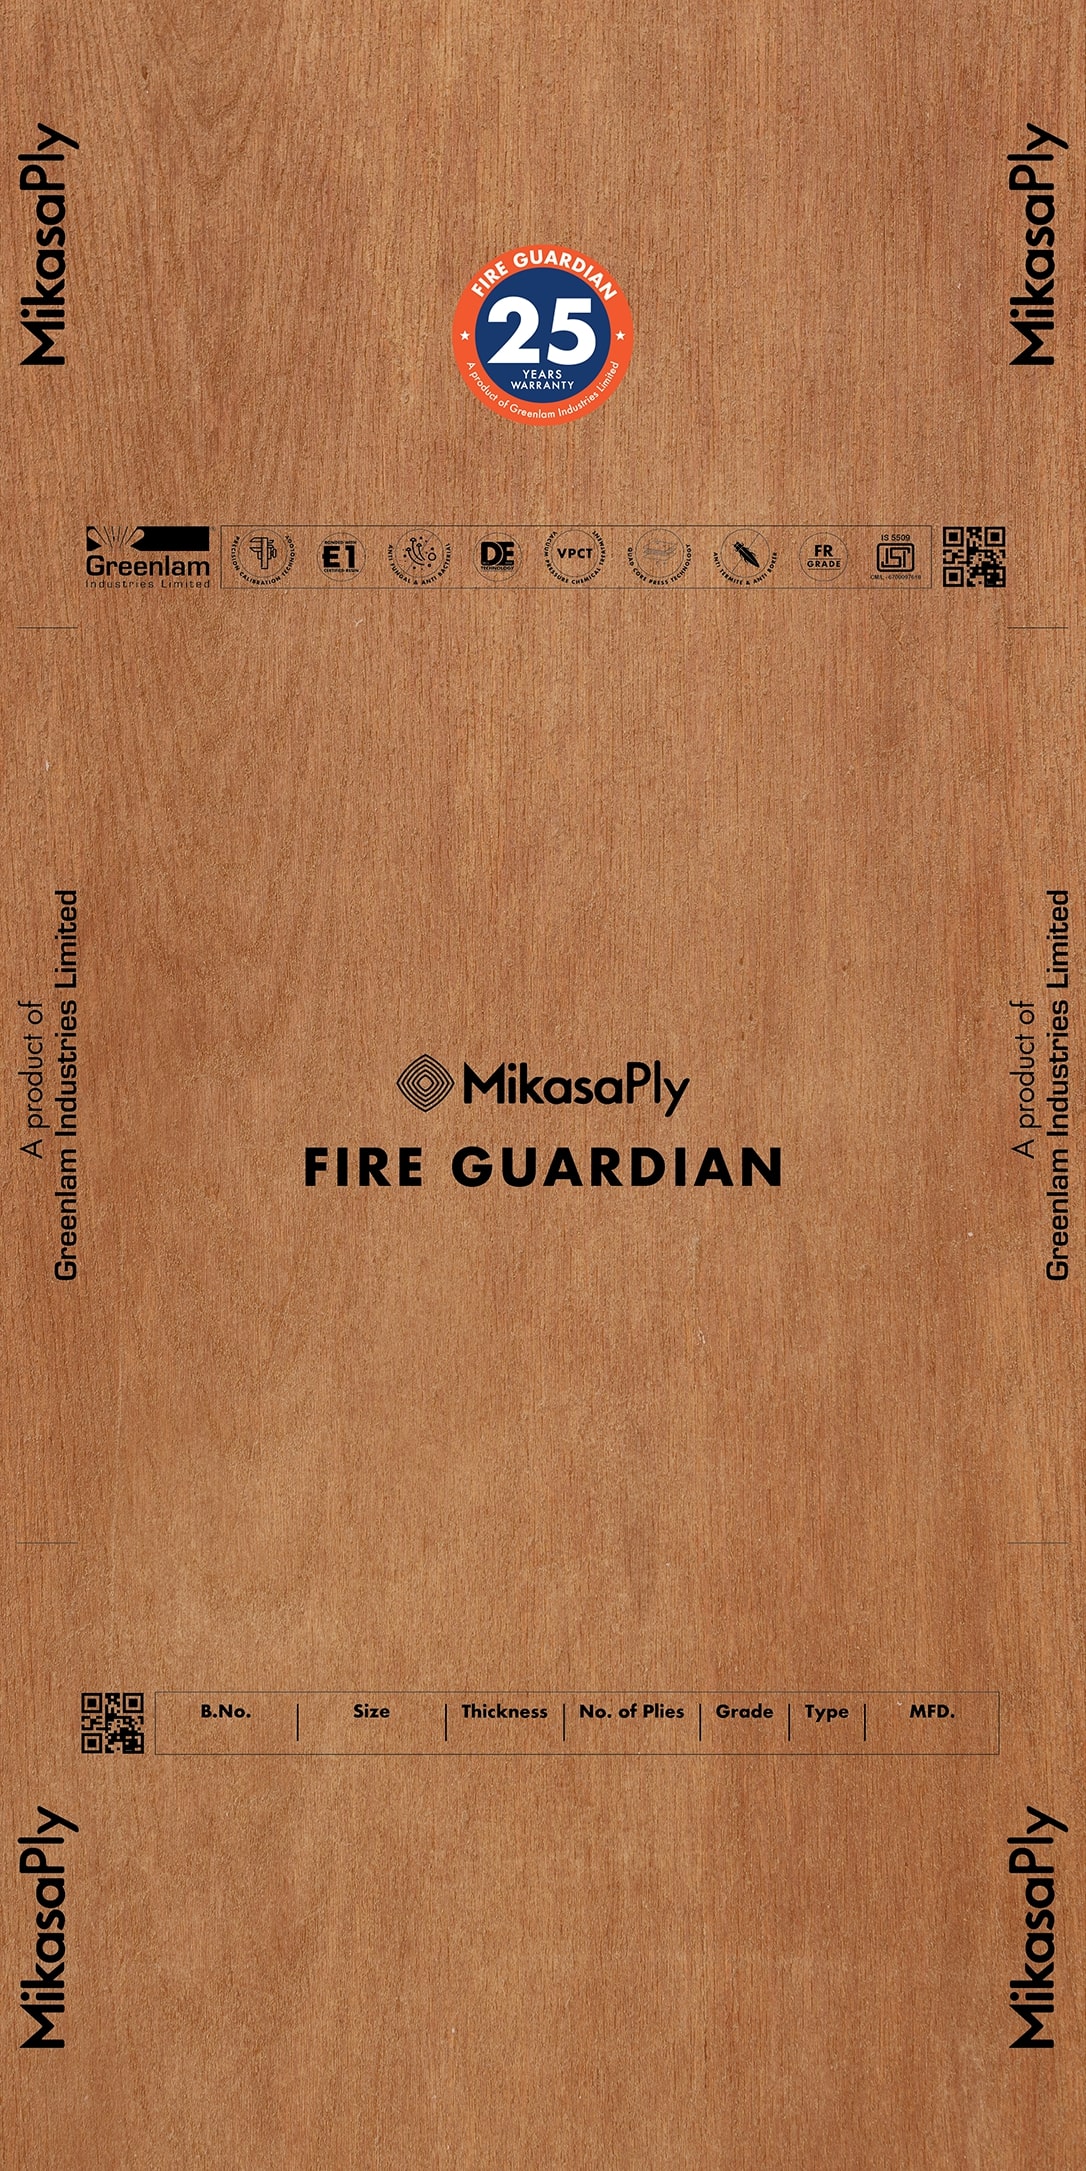 Fire retardant ply board by MikasaPly